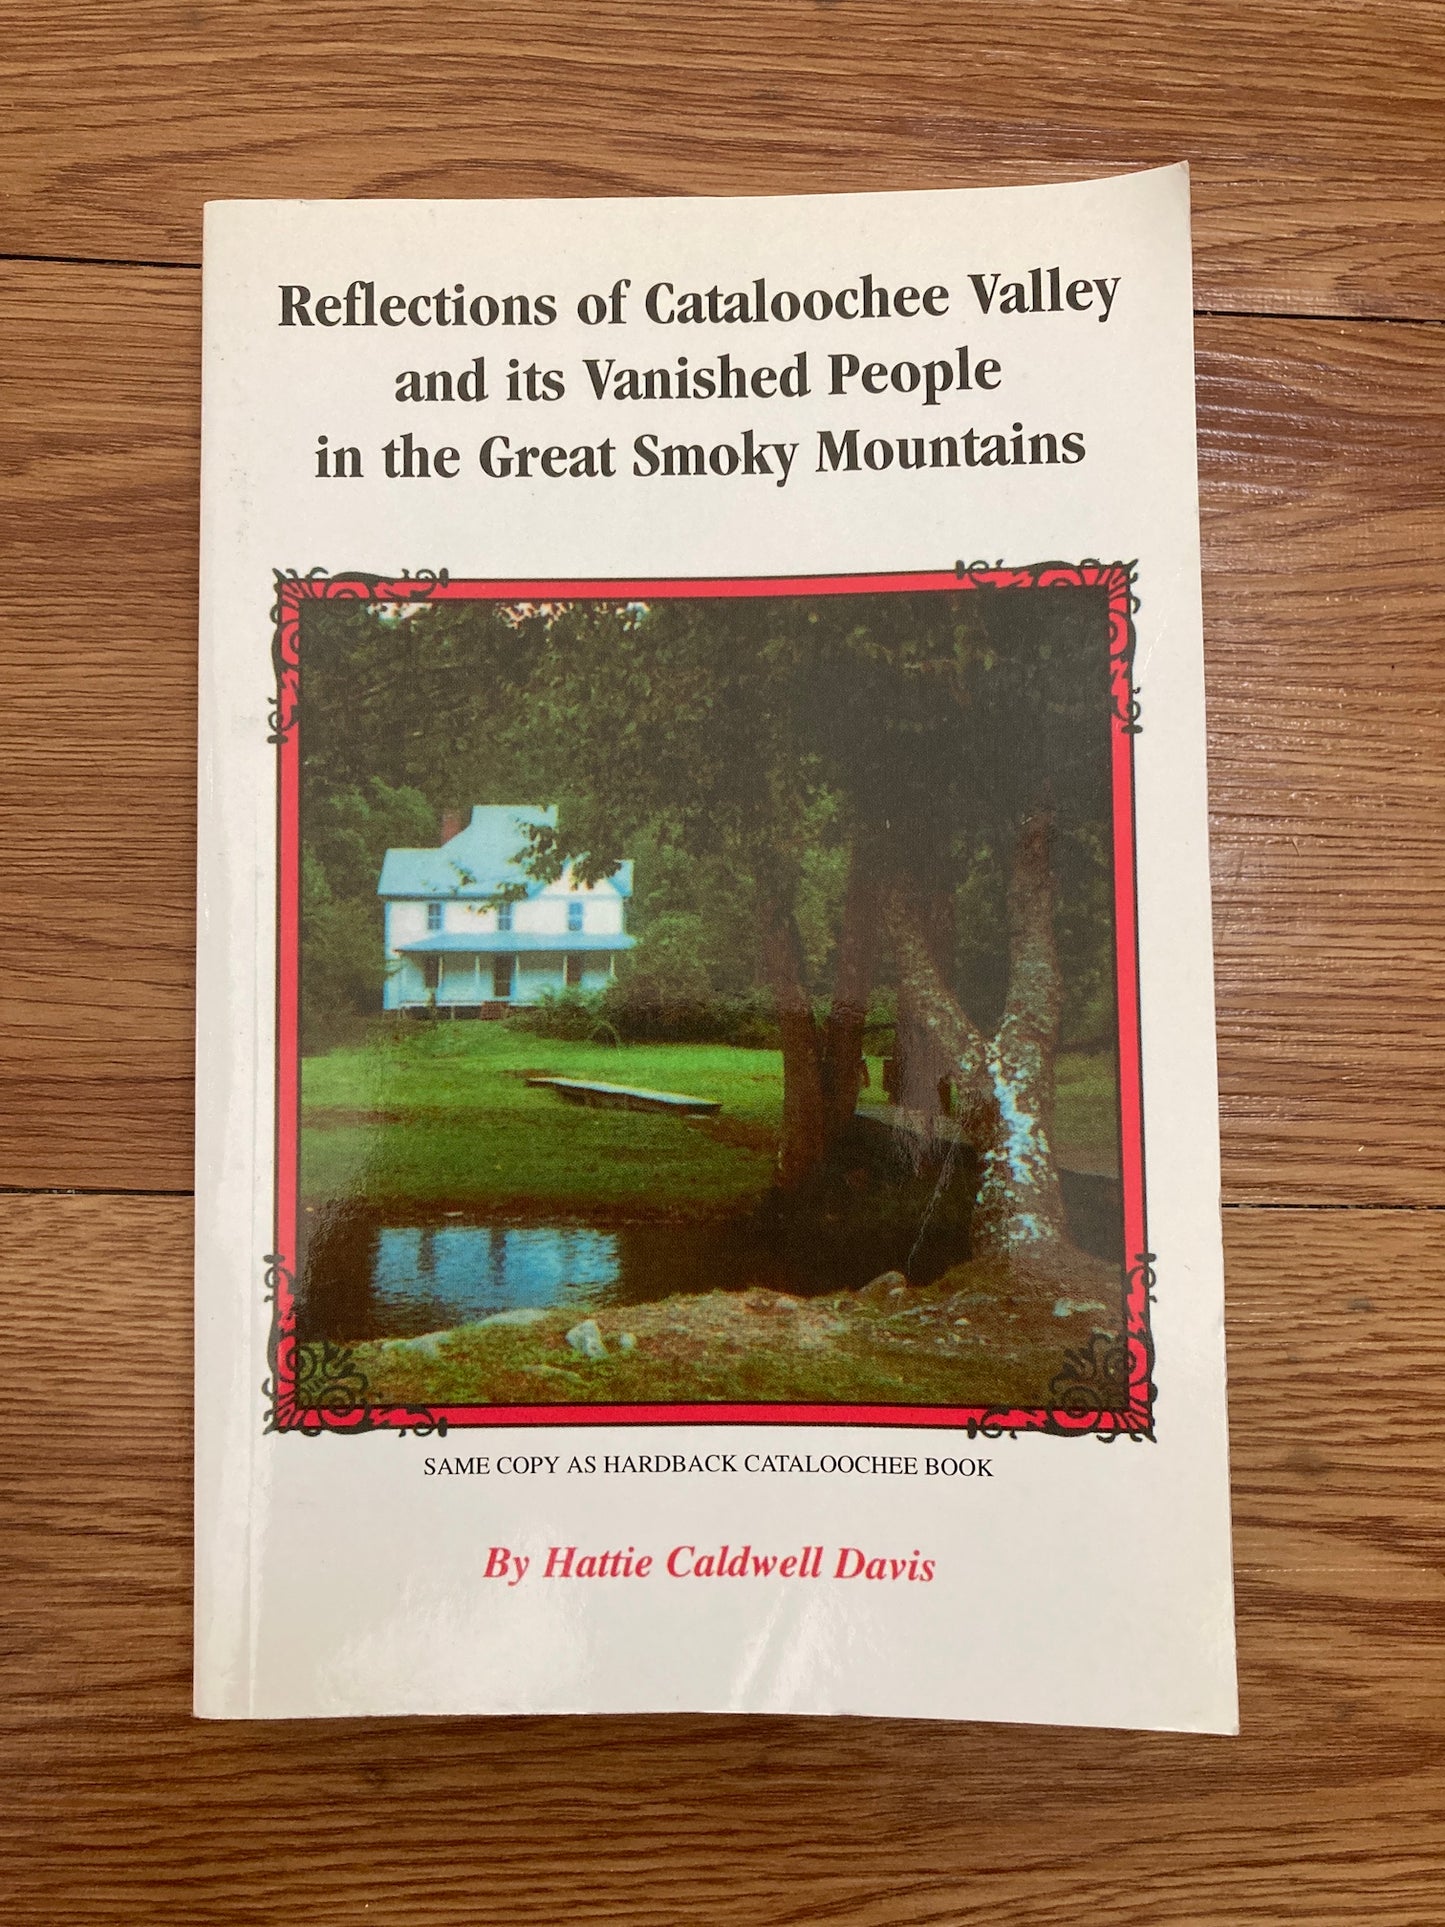 Reflections of Cataloochee Valley and its Vanished People